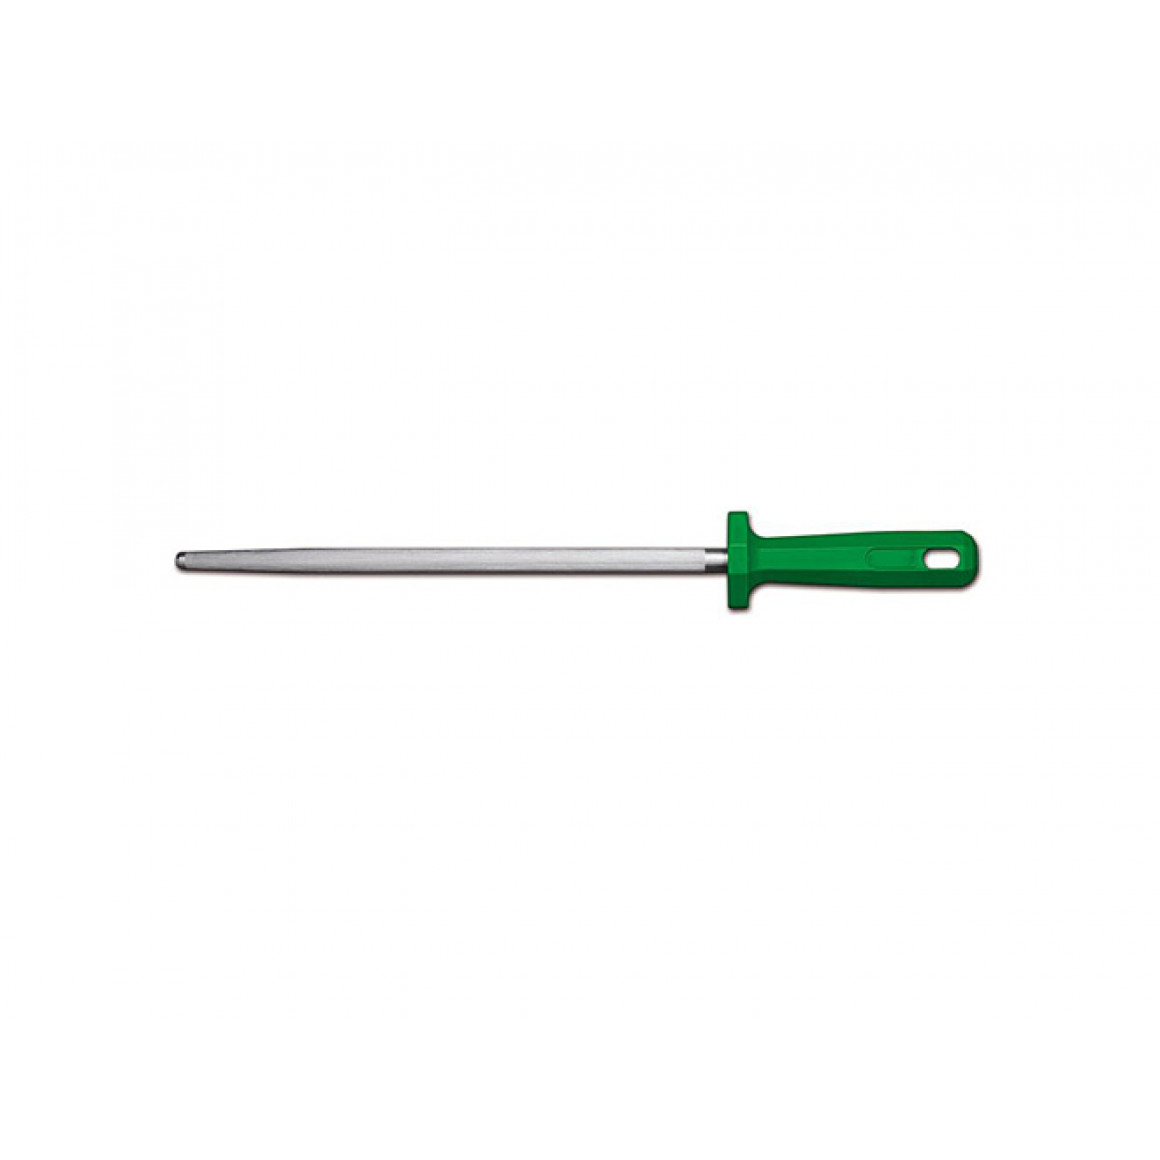 Supra Green - Chrome-plated sharpening steel/L30